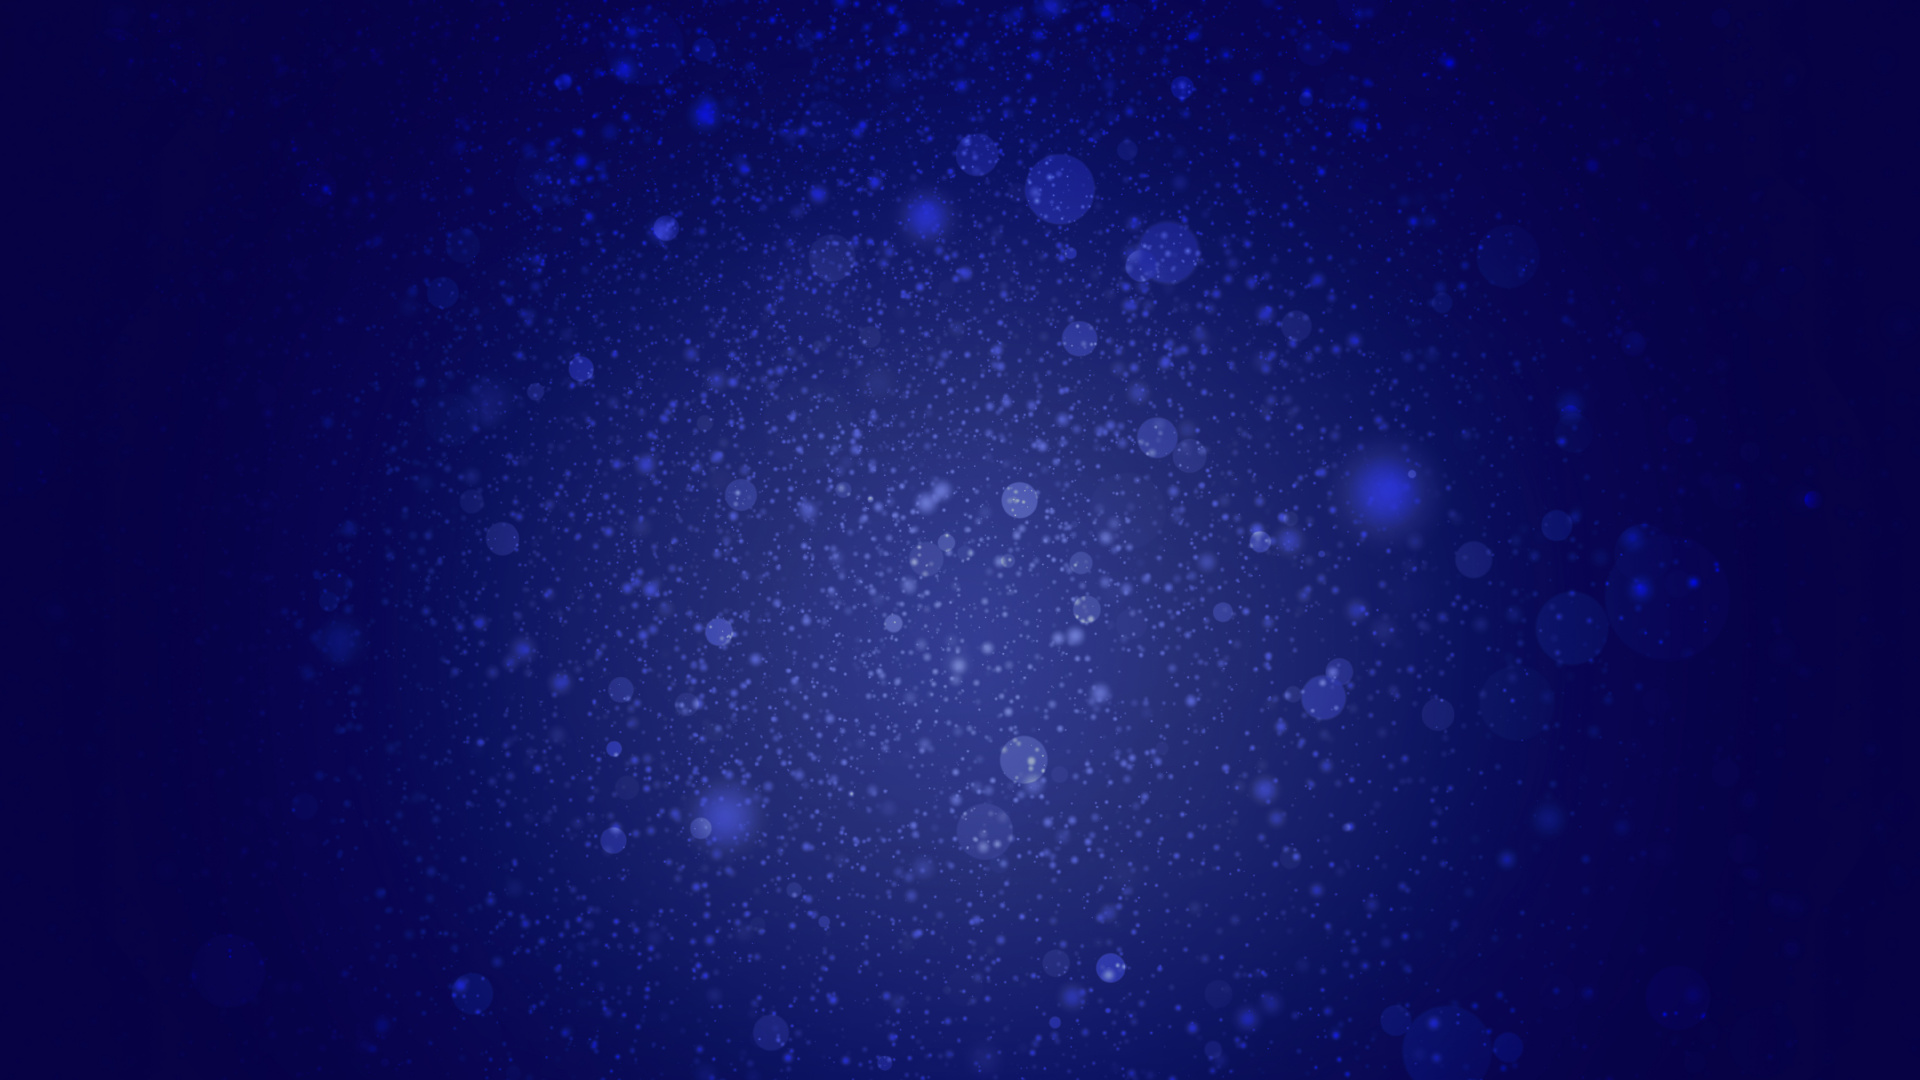 Blue and White Galaxy Illustration. Wallpaper in 1920x1080 Resolution